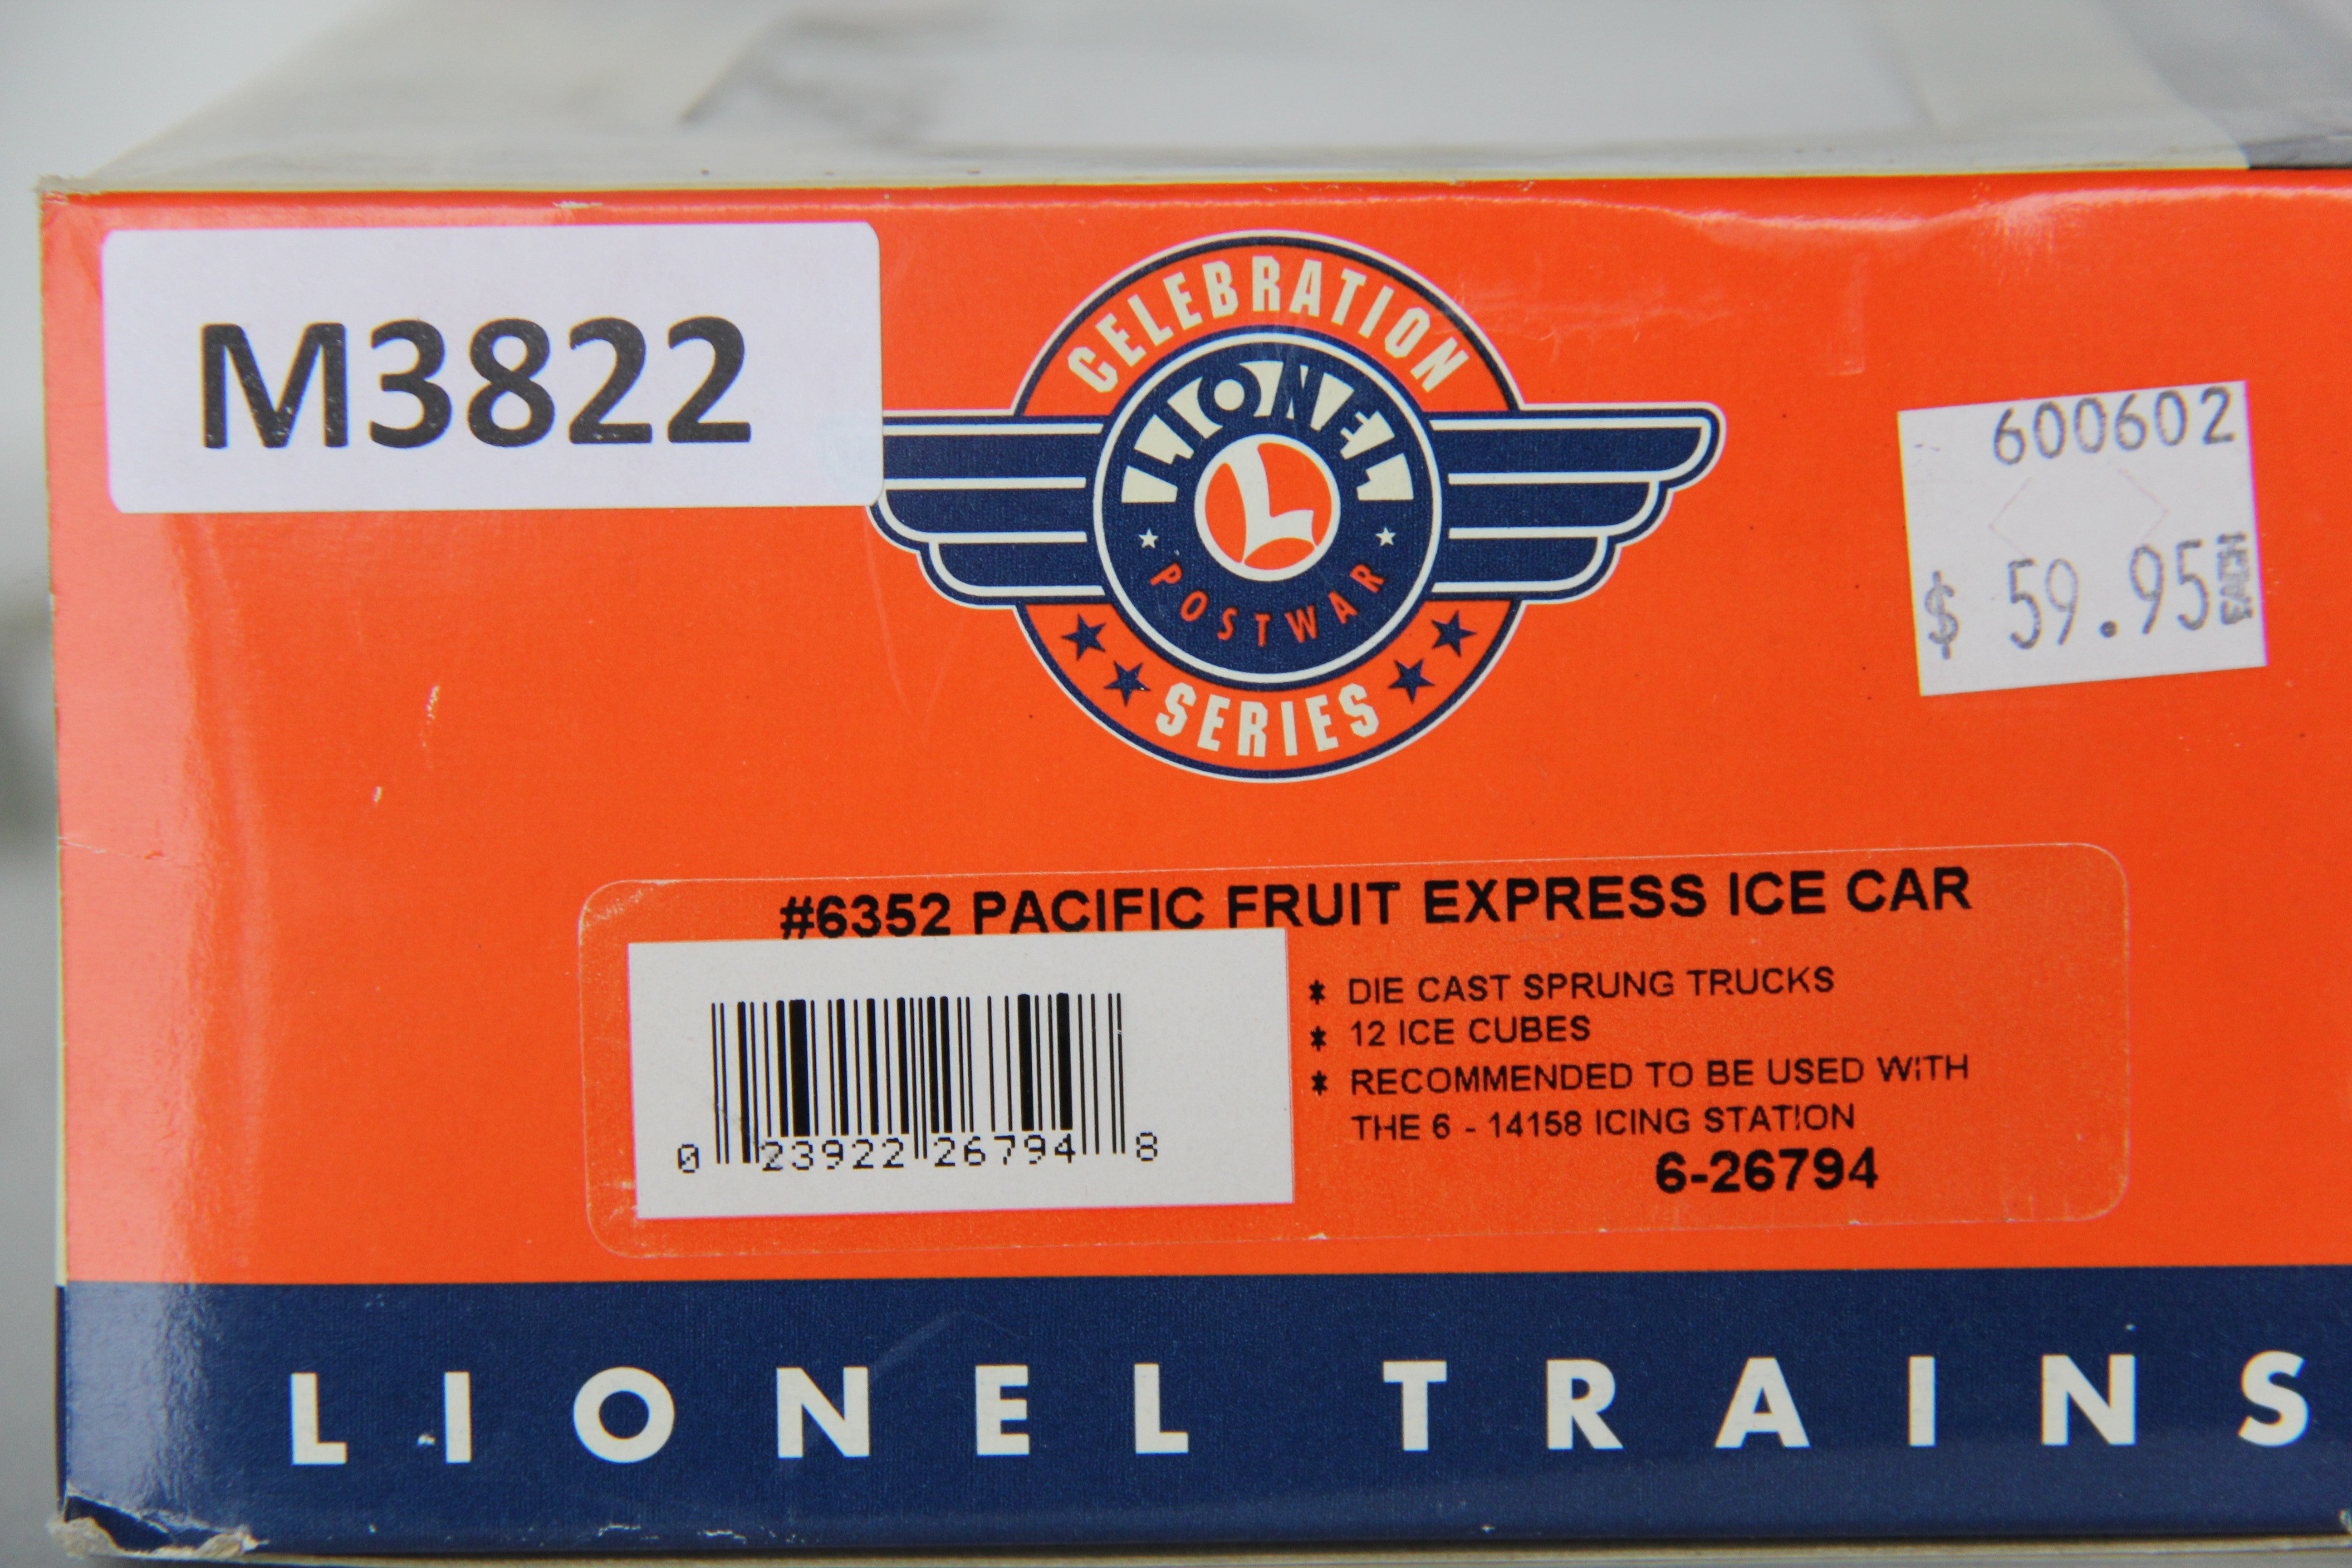 Lionel 6-26794 #6352 Pacific Fruit Express Ice Car-Second hand-M3822